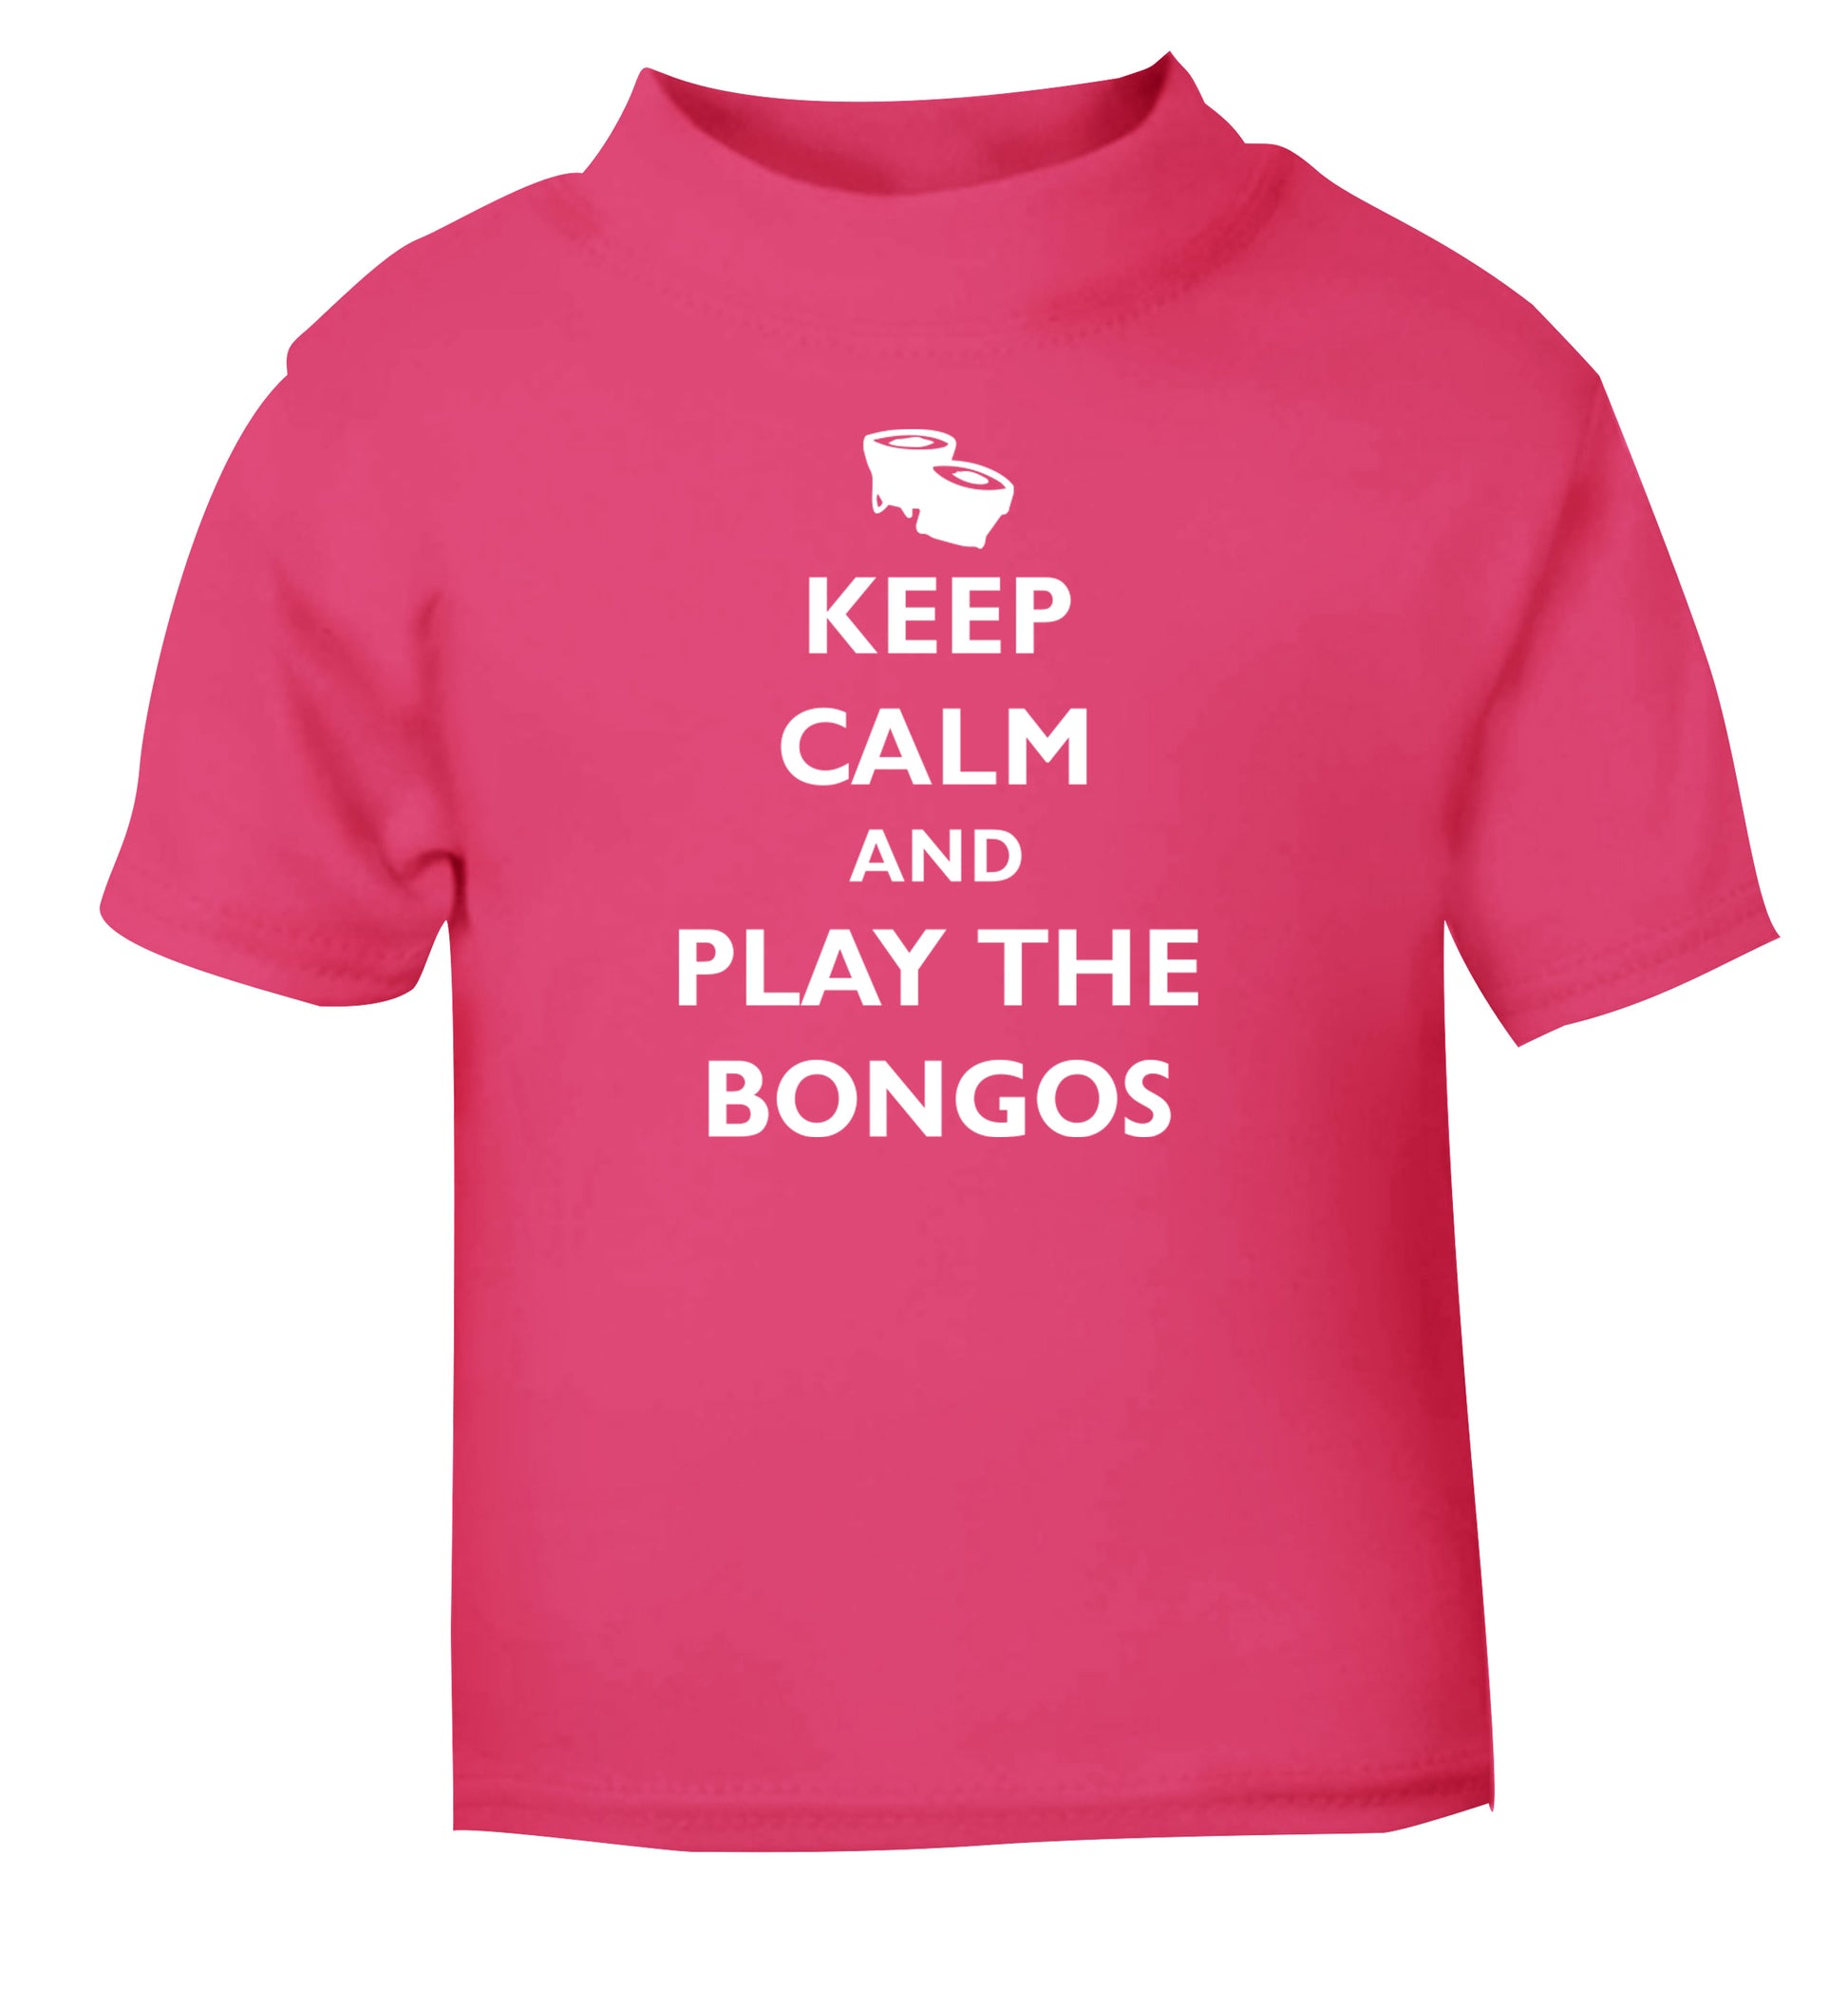 Keep calm and play the bongos pink Baby Toddler Tshirt 2 Years